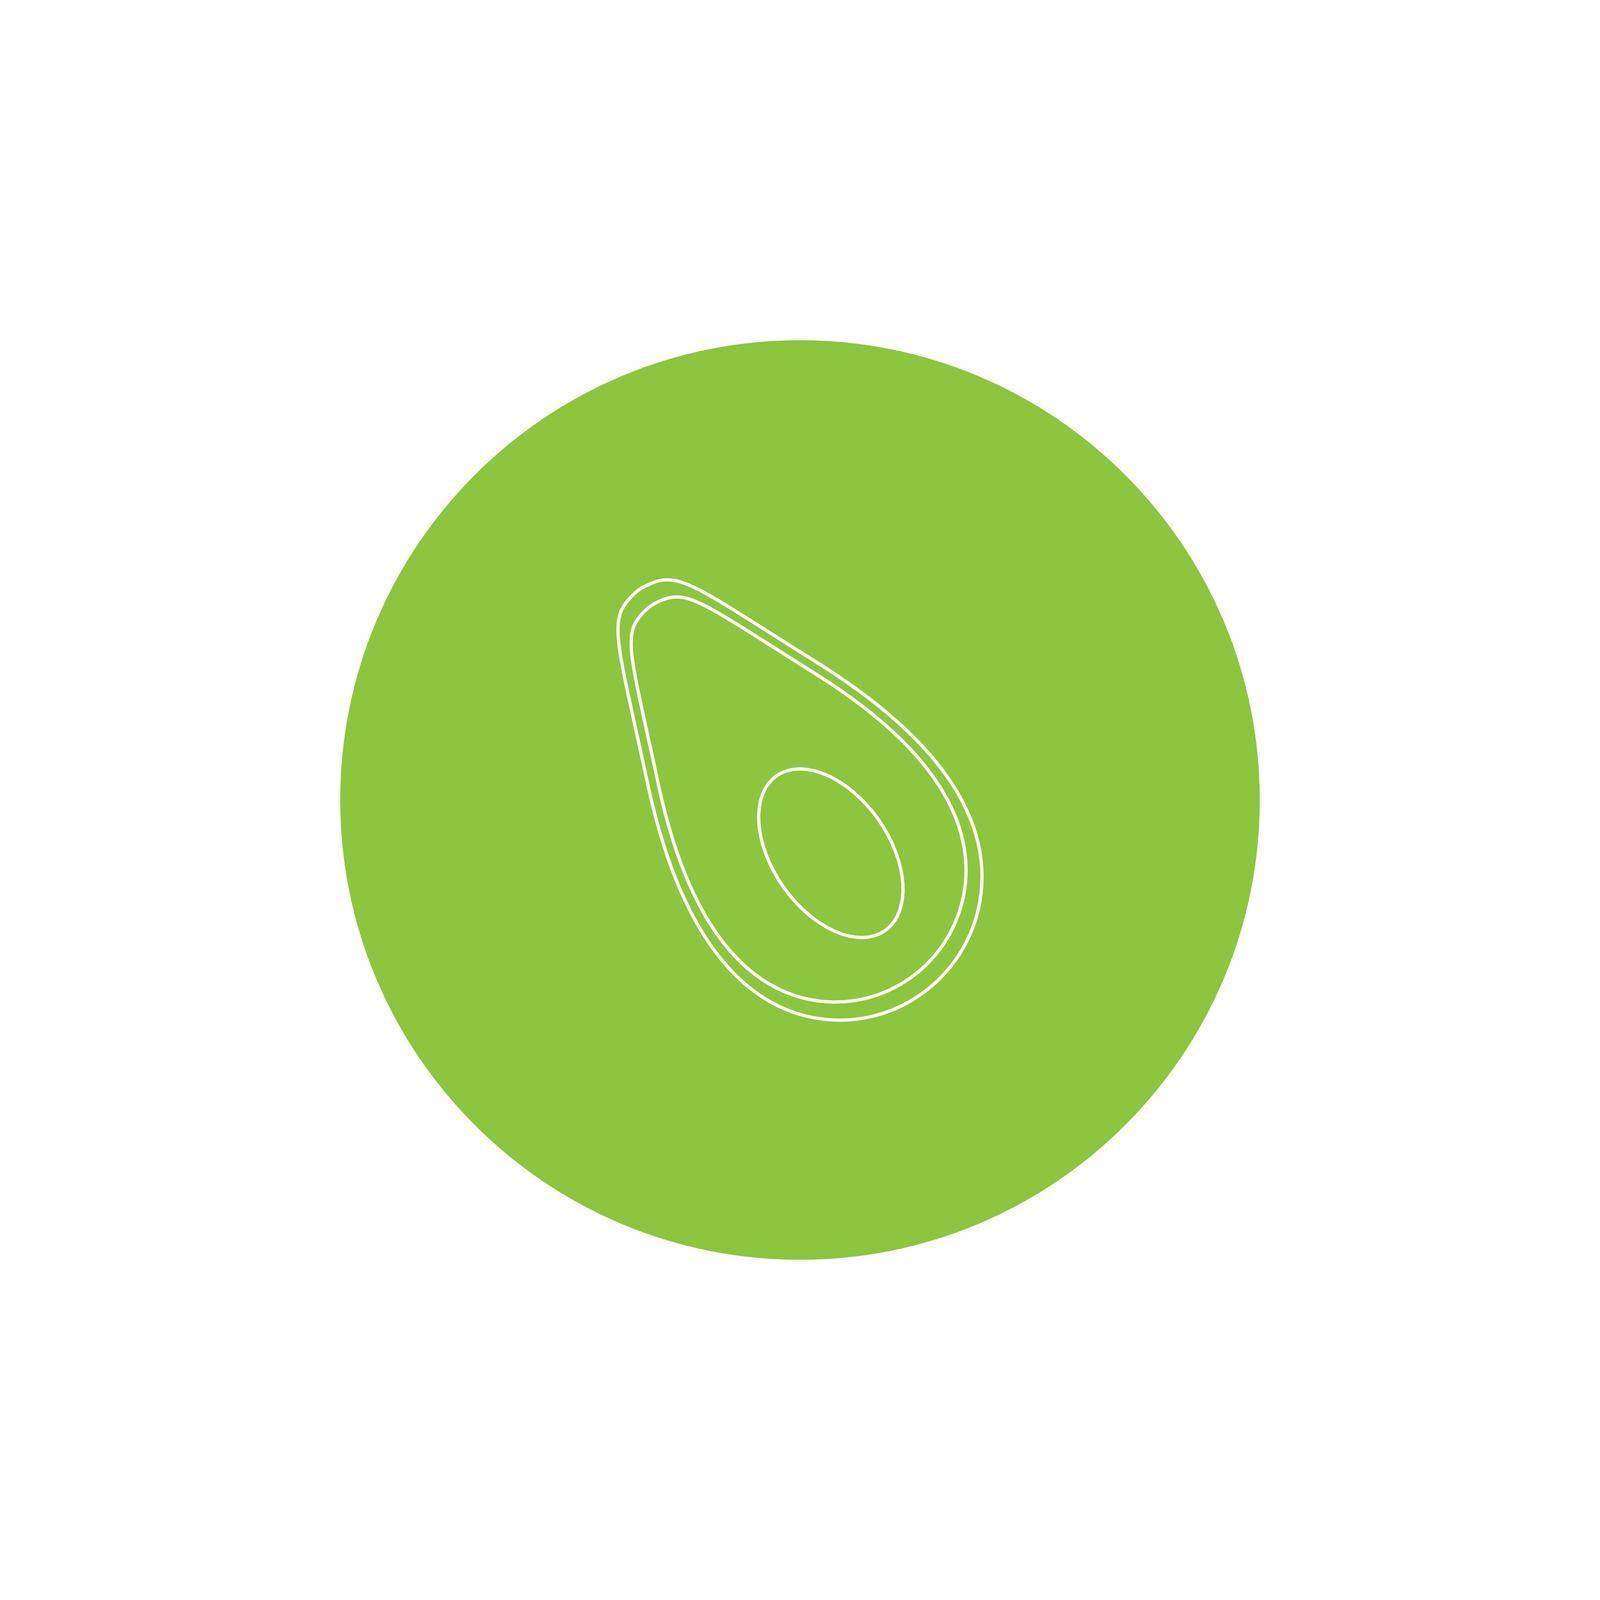 Avocado hand drawn outline doodle icon. Vector sketch illustration of avocado with a seed for print, web, mobile and infographics isolated on round green background.